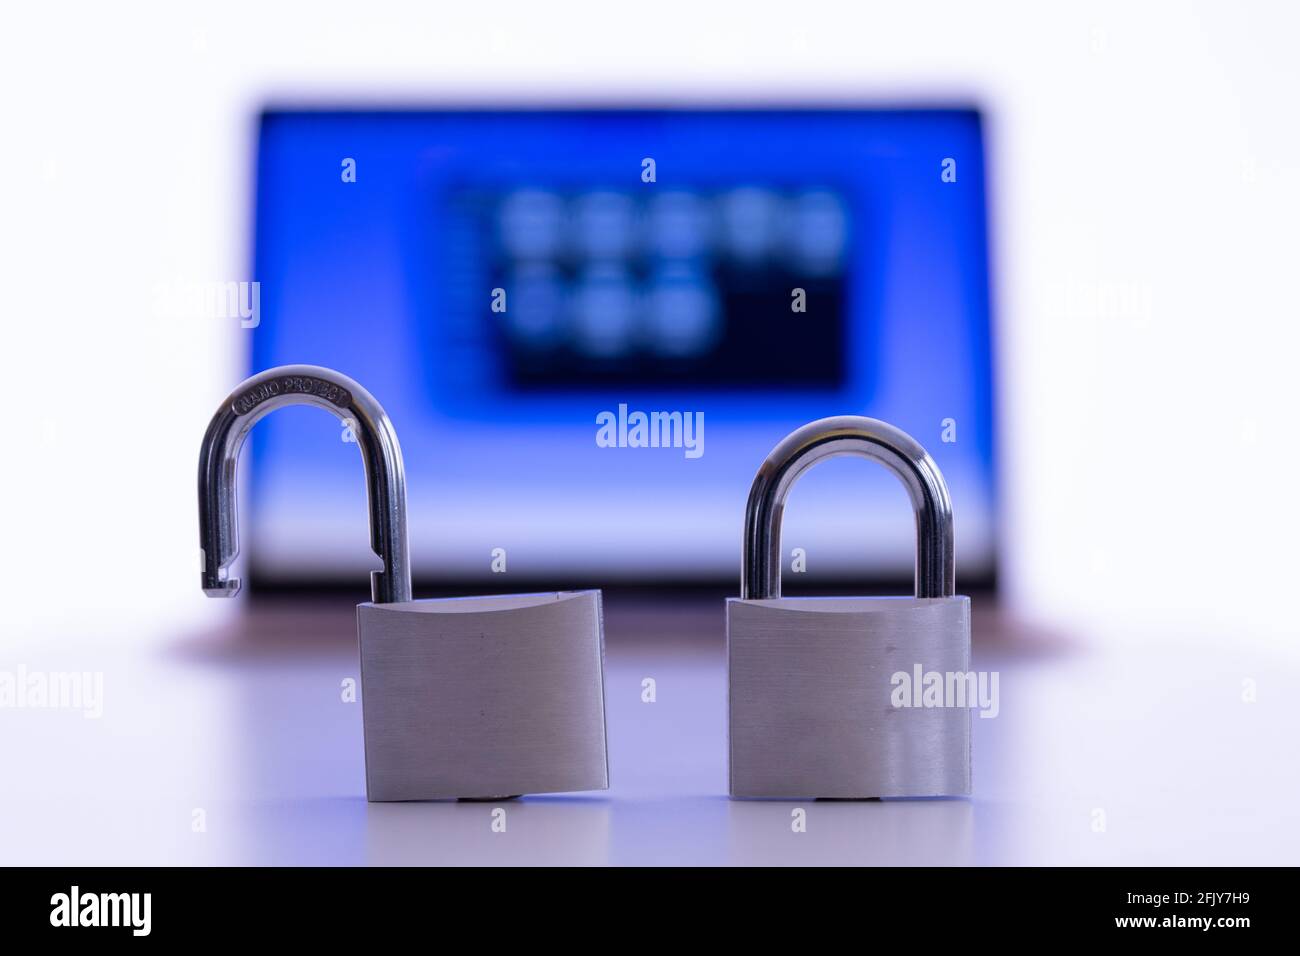 Privacy and data protection: Laptop and smartphone with padlock in foreground Stock Photo